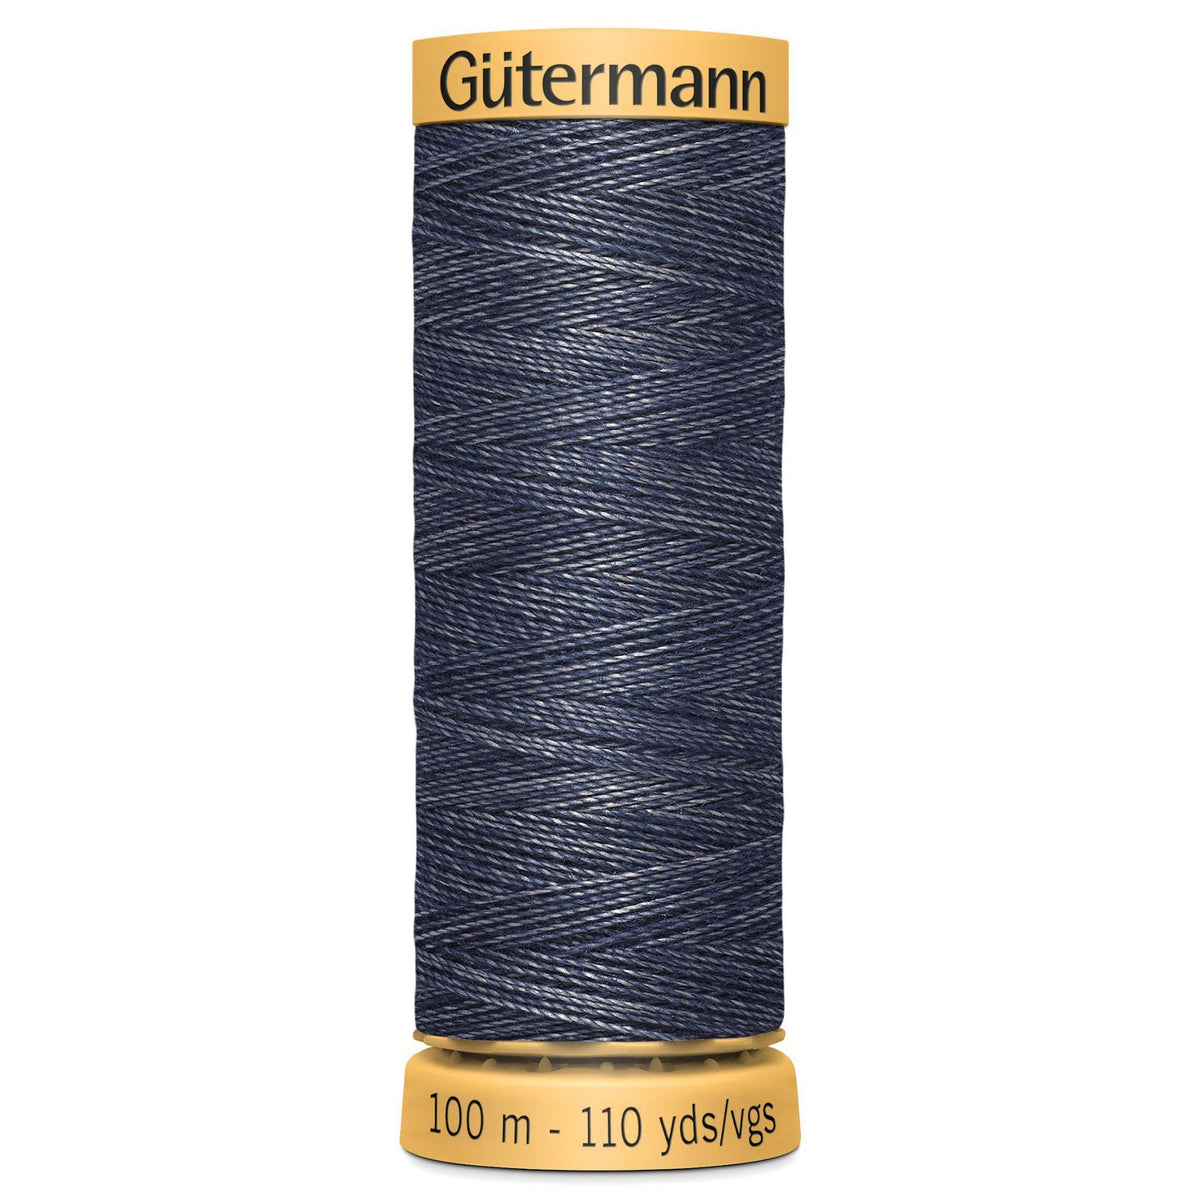 Check out our website for the most recent designs of 100m Gutermann Blue Denim  Thread Hot Pink Haberdashery . Unique Designs You Won't Find Anywhere else